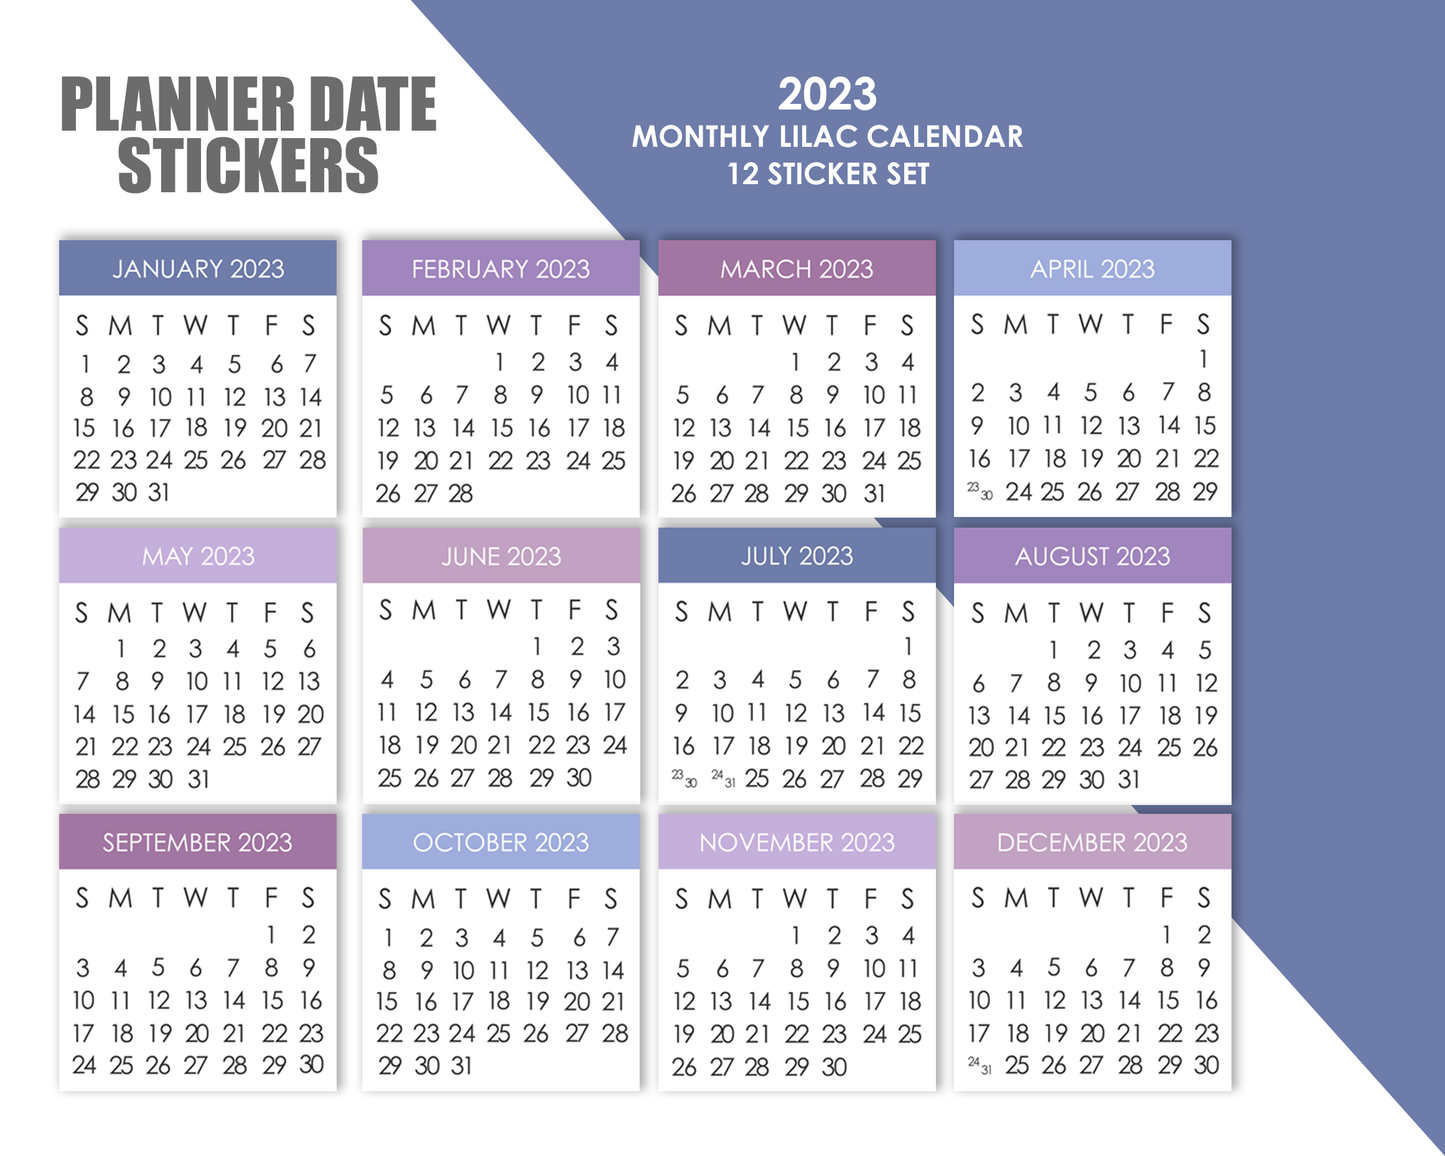 2023 Monthly Calendar Planner Stickers - Pastels